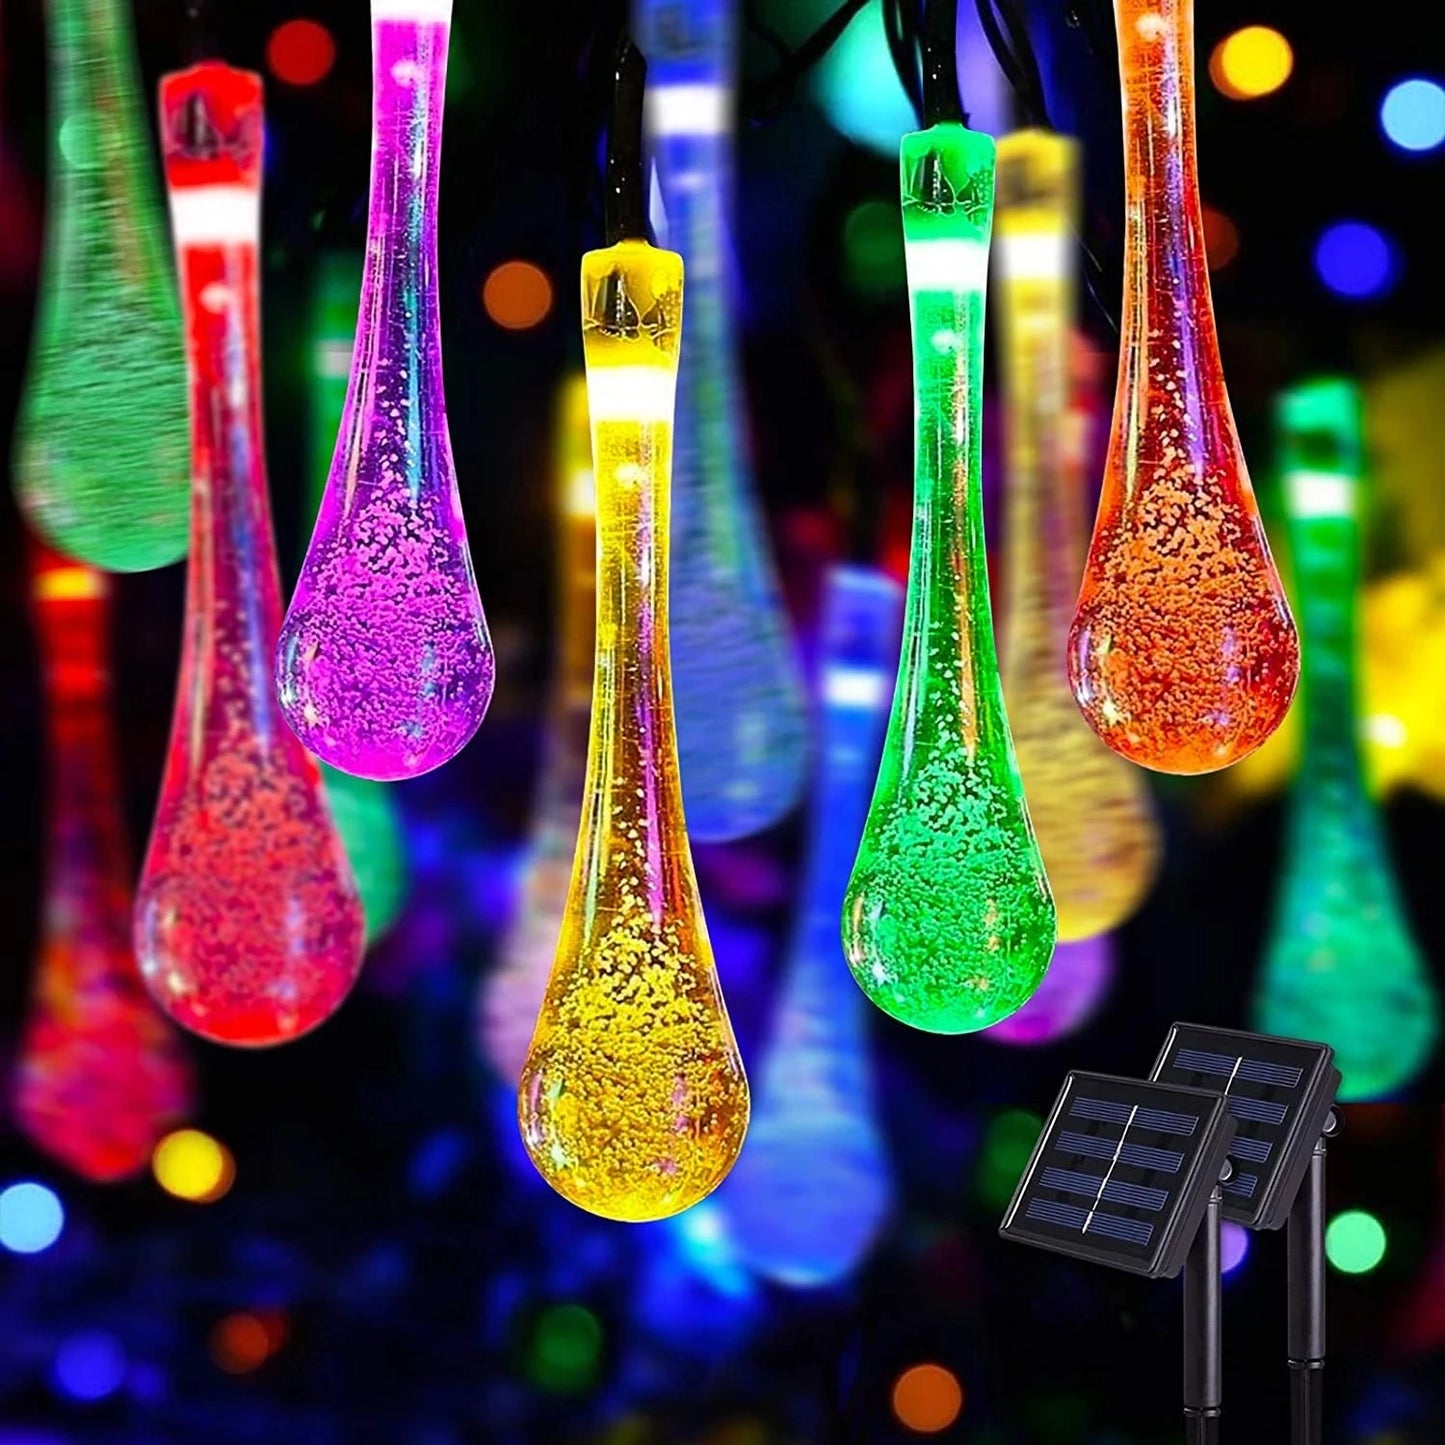 Water droplets Solar String Lights 6m 30led Waterproof Outdoor Decoration garland Fairy Lights Christmas Wedding party Garden - Free Shipping